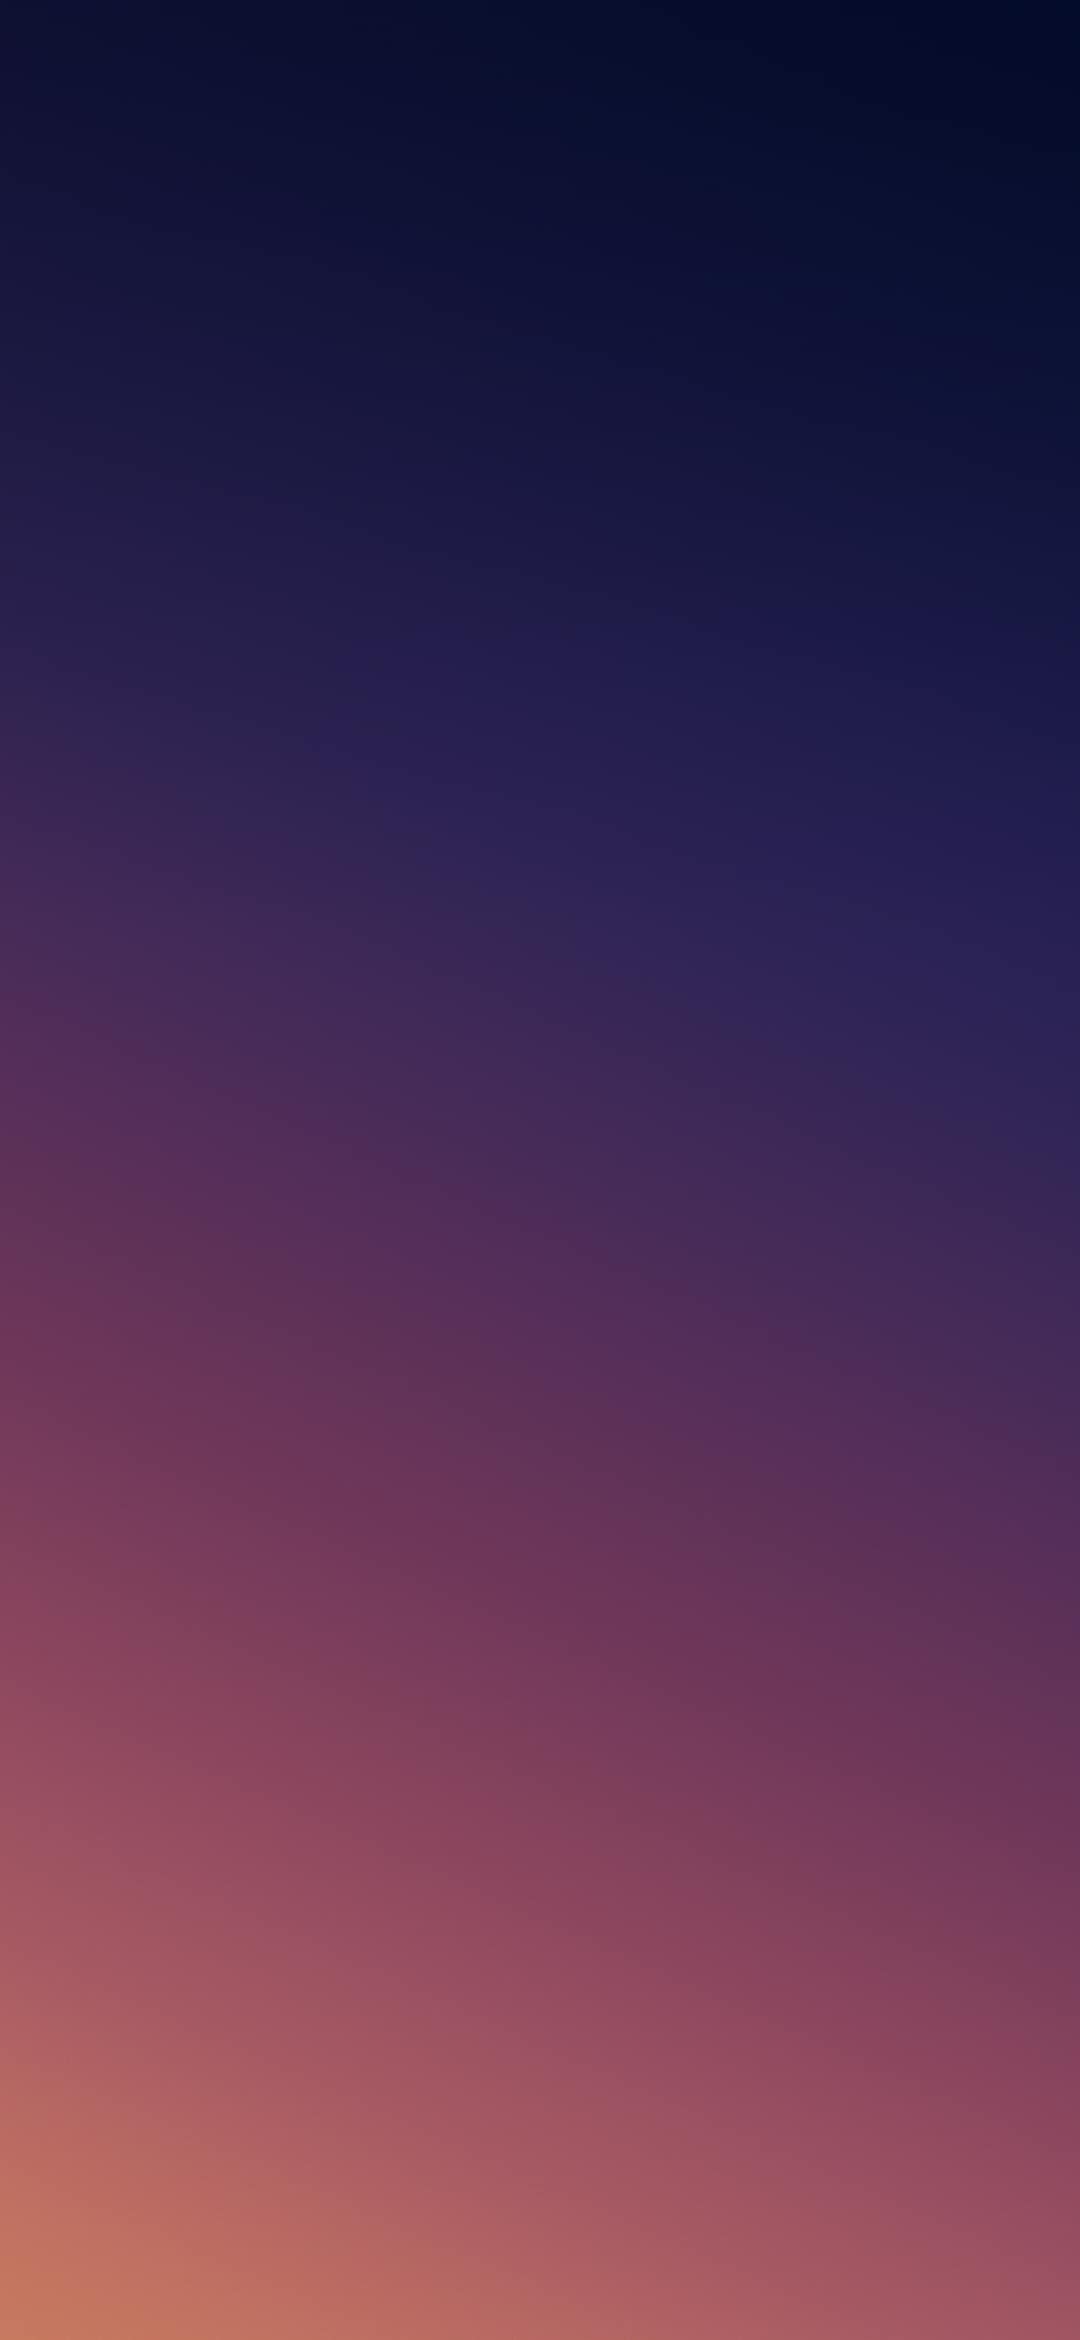 Free download Download Redmi Note 7 and Redmi Note 7 Pro Wallpaper Updated [1080x2340] for your Desktop, Mobile & Tablet. Explore Redmi Note 7 Wallpaper. Redmi Note 7 Wallpaper